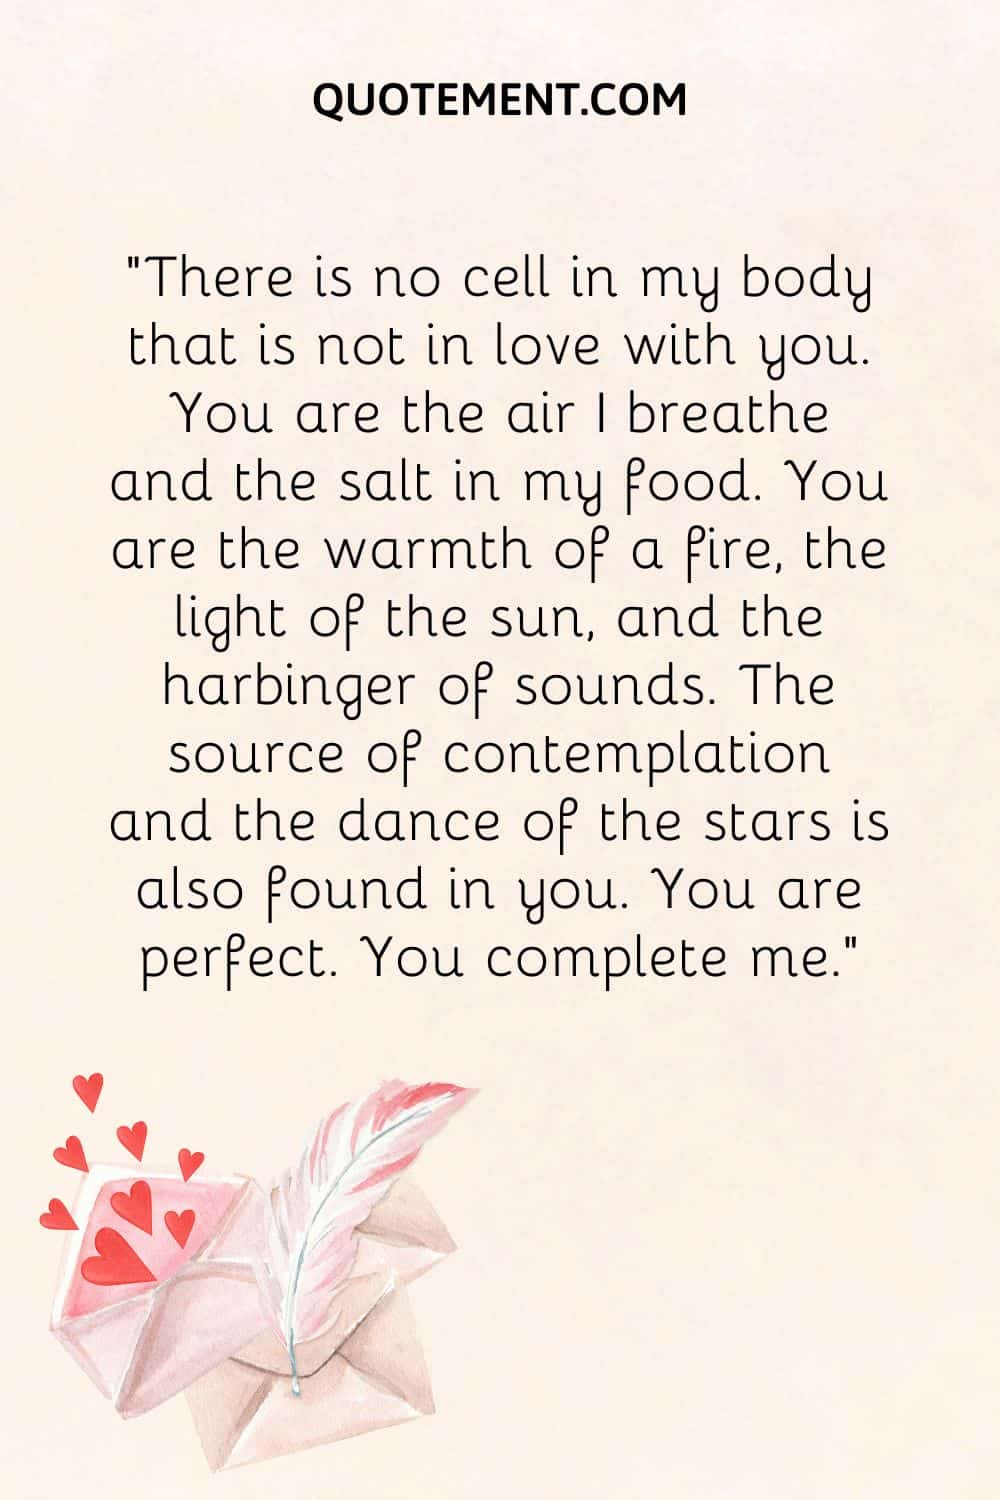 “There is no cell in my body that is not in love with you. You are the air I breathe and the salt in my food. You are the warmth of a fire, the light of the sun, and the harbinger of sounds.